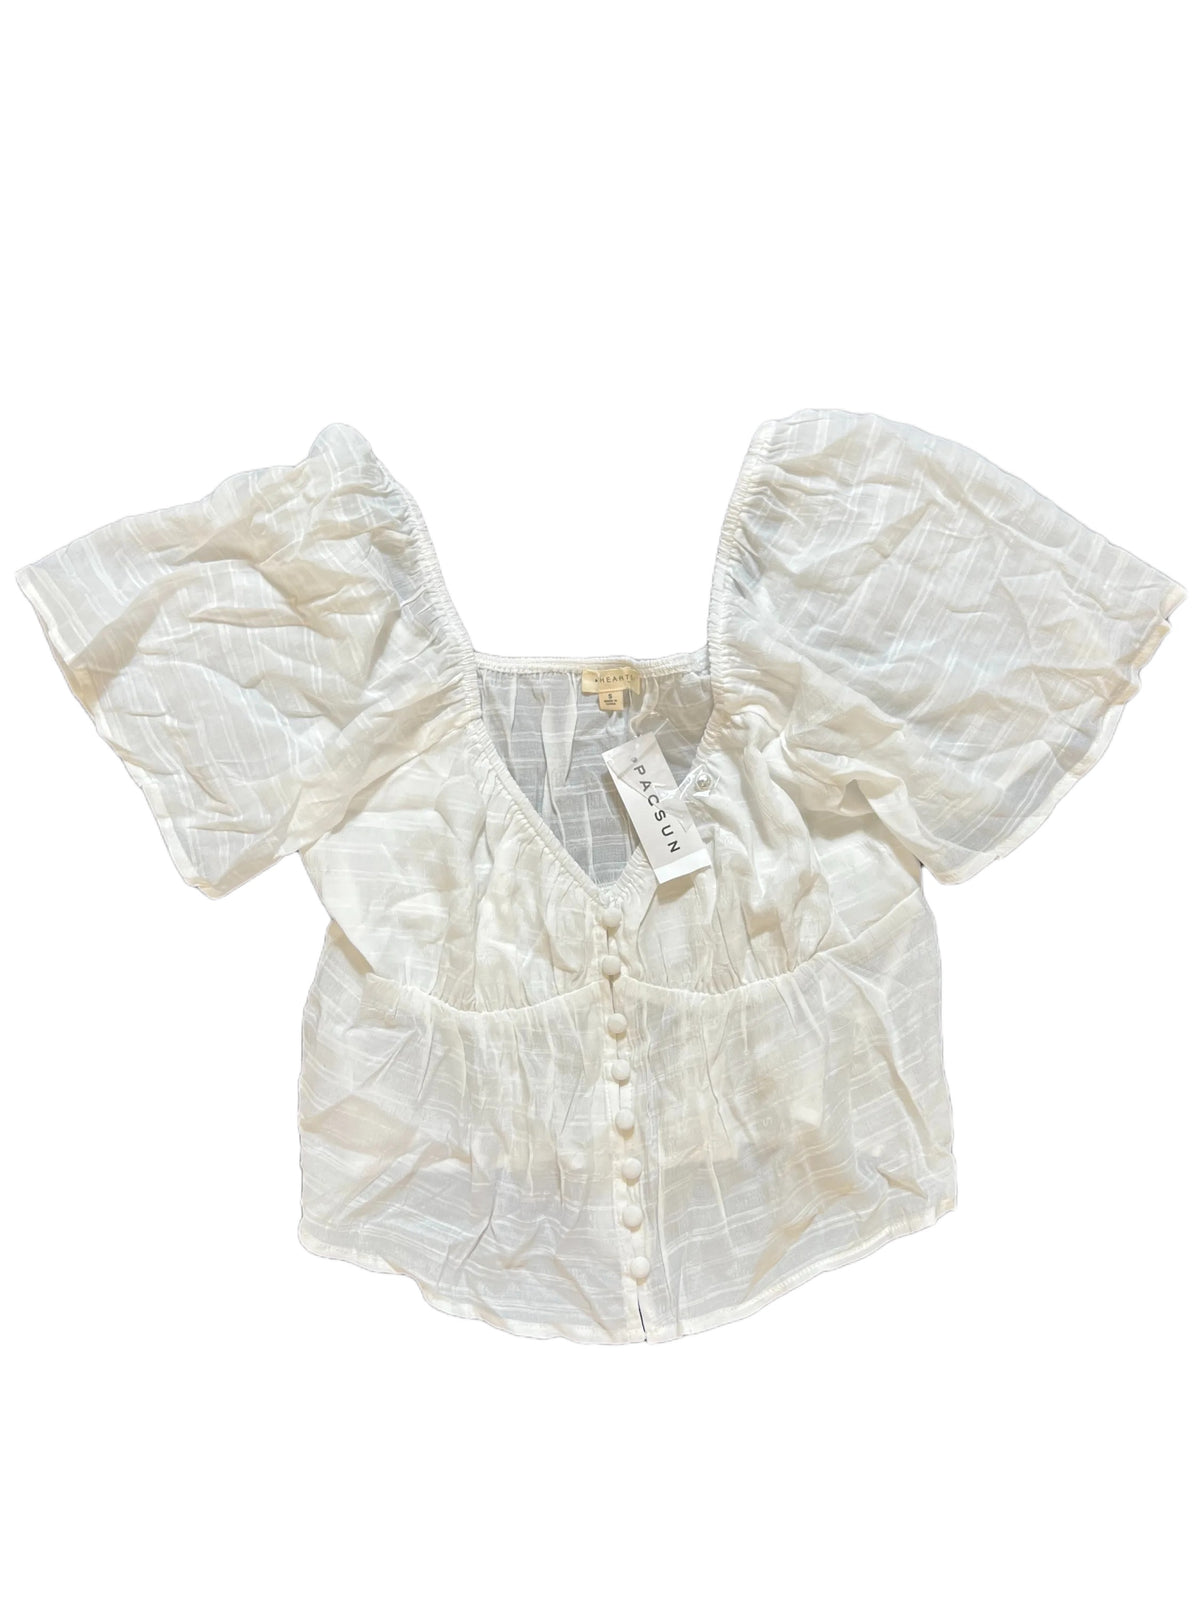 L.A Hearts- White Blouse New With Tags!